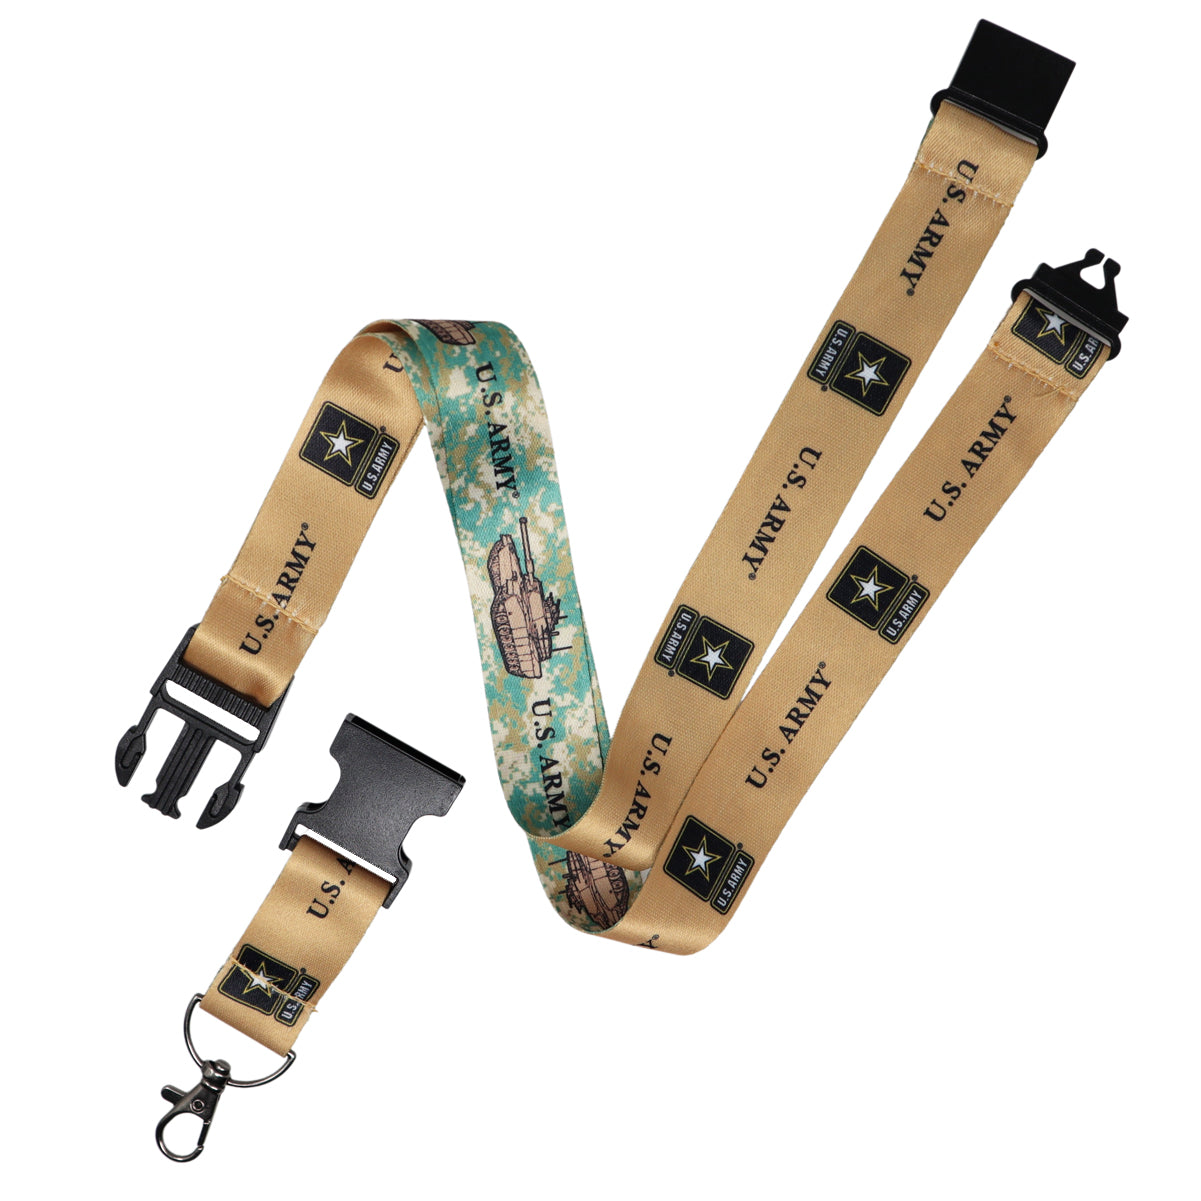 Officially Licensed Military Lanyard Badge Holder for Army, Navy, Airforce, Marines and Vietnam Veteran (SPID-2030)